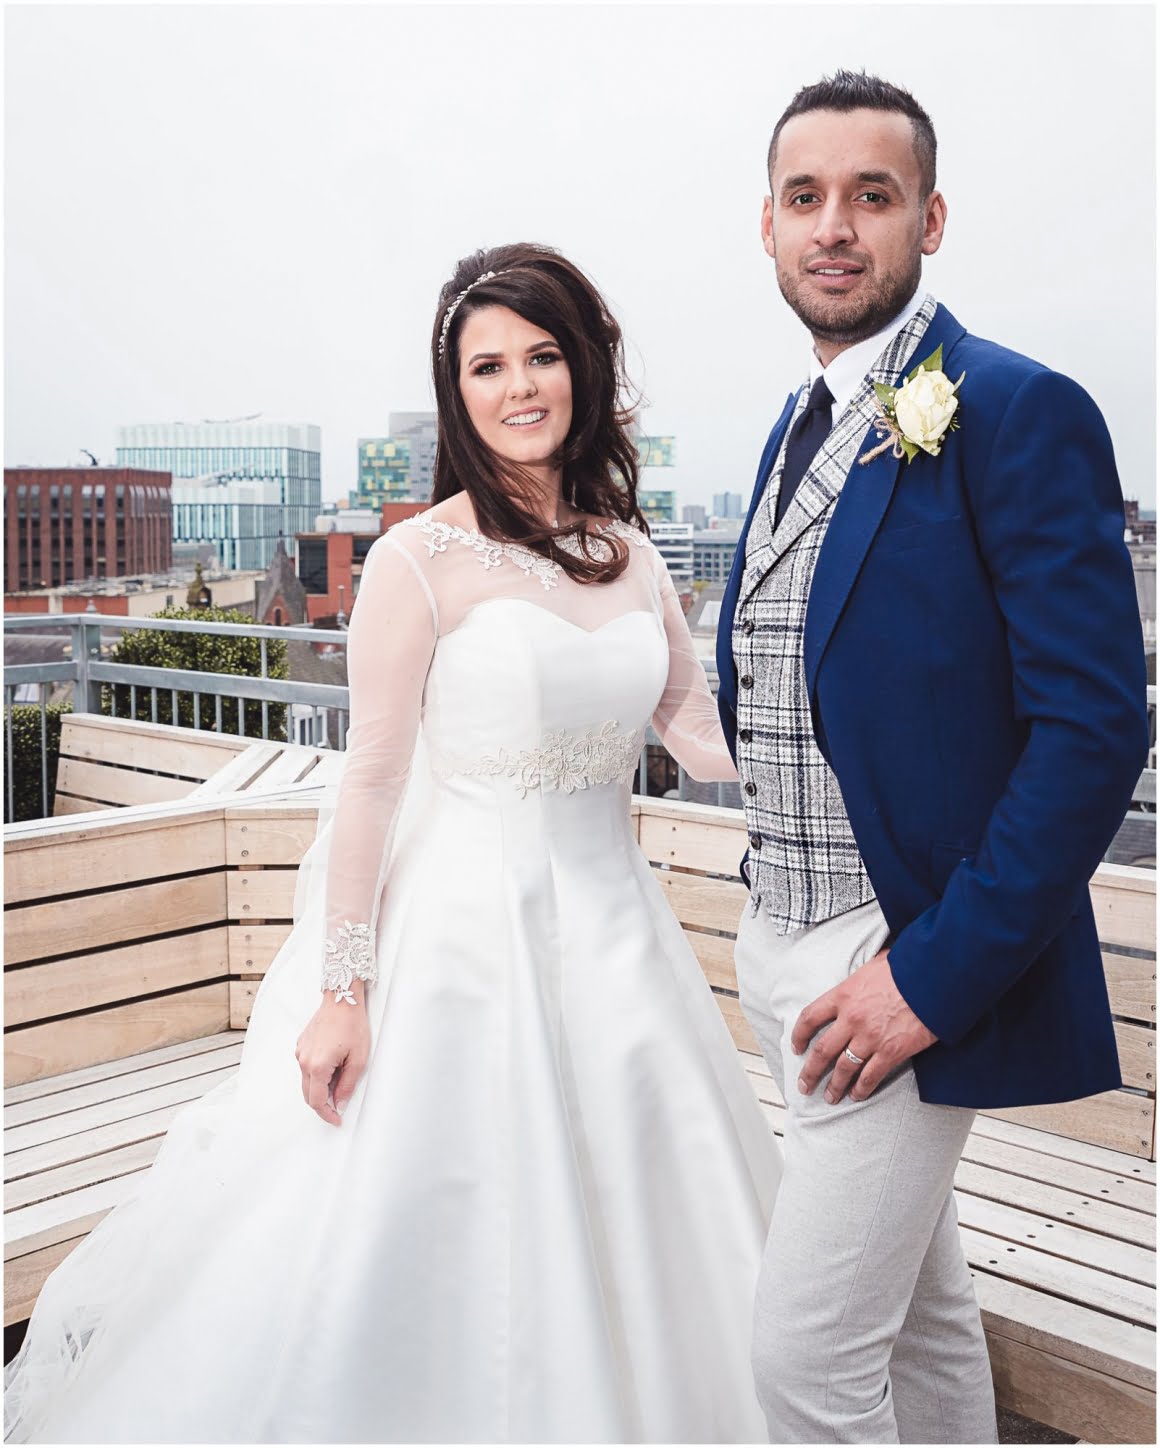 Roof top garden picture The King Street Townhouse Manchester , The King Street Townhouse wedding photos, The King Street Townhouse Wedding photographer